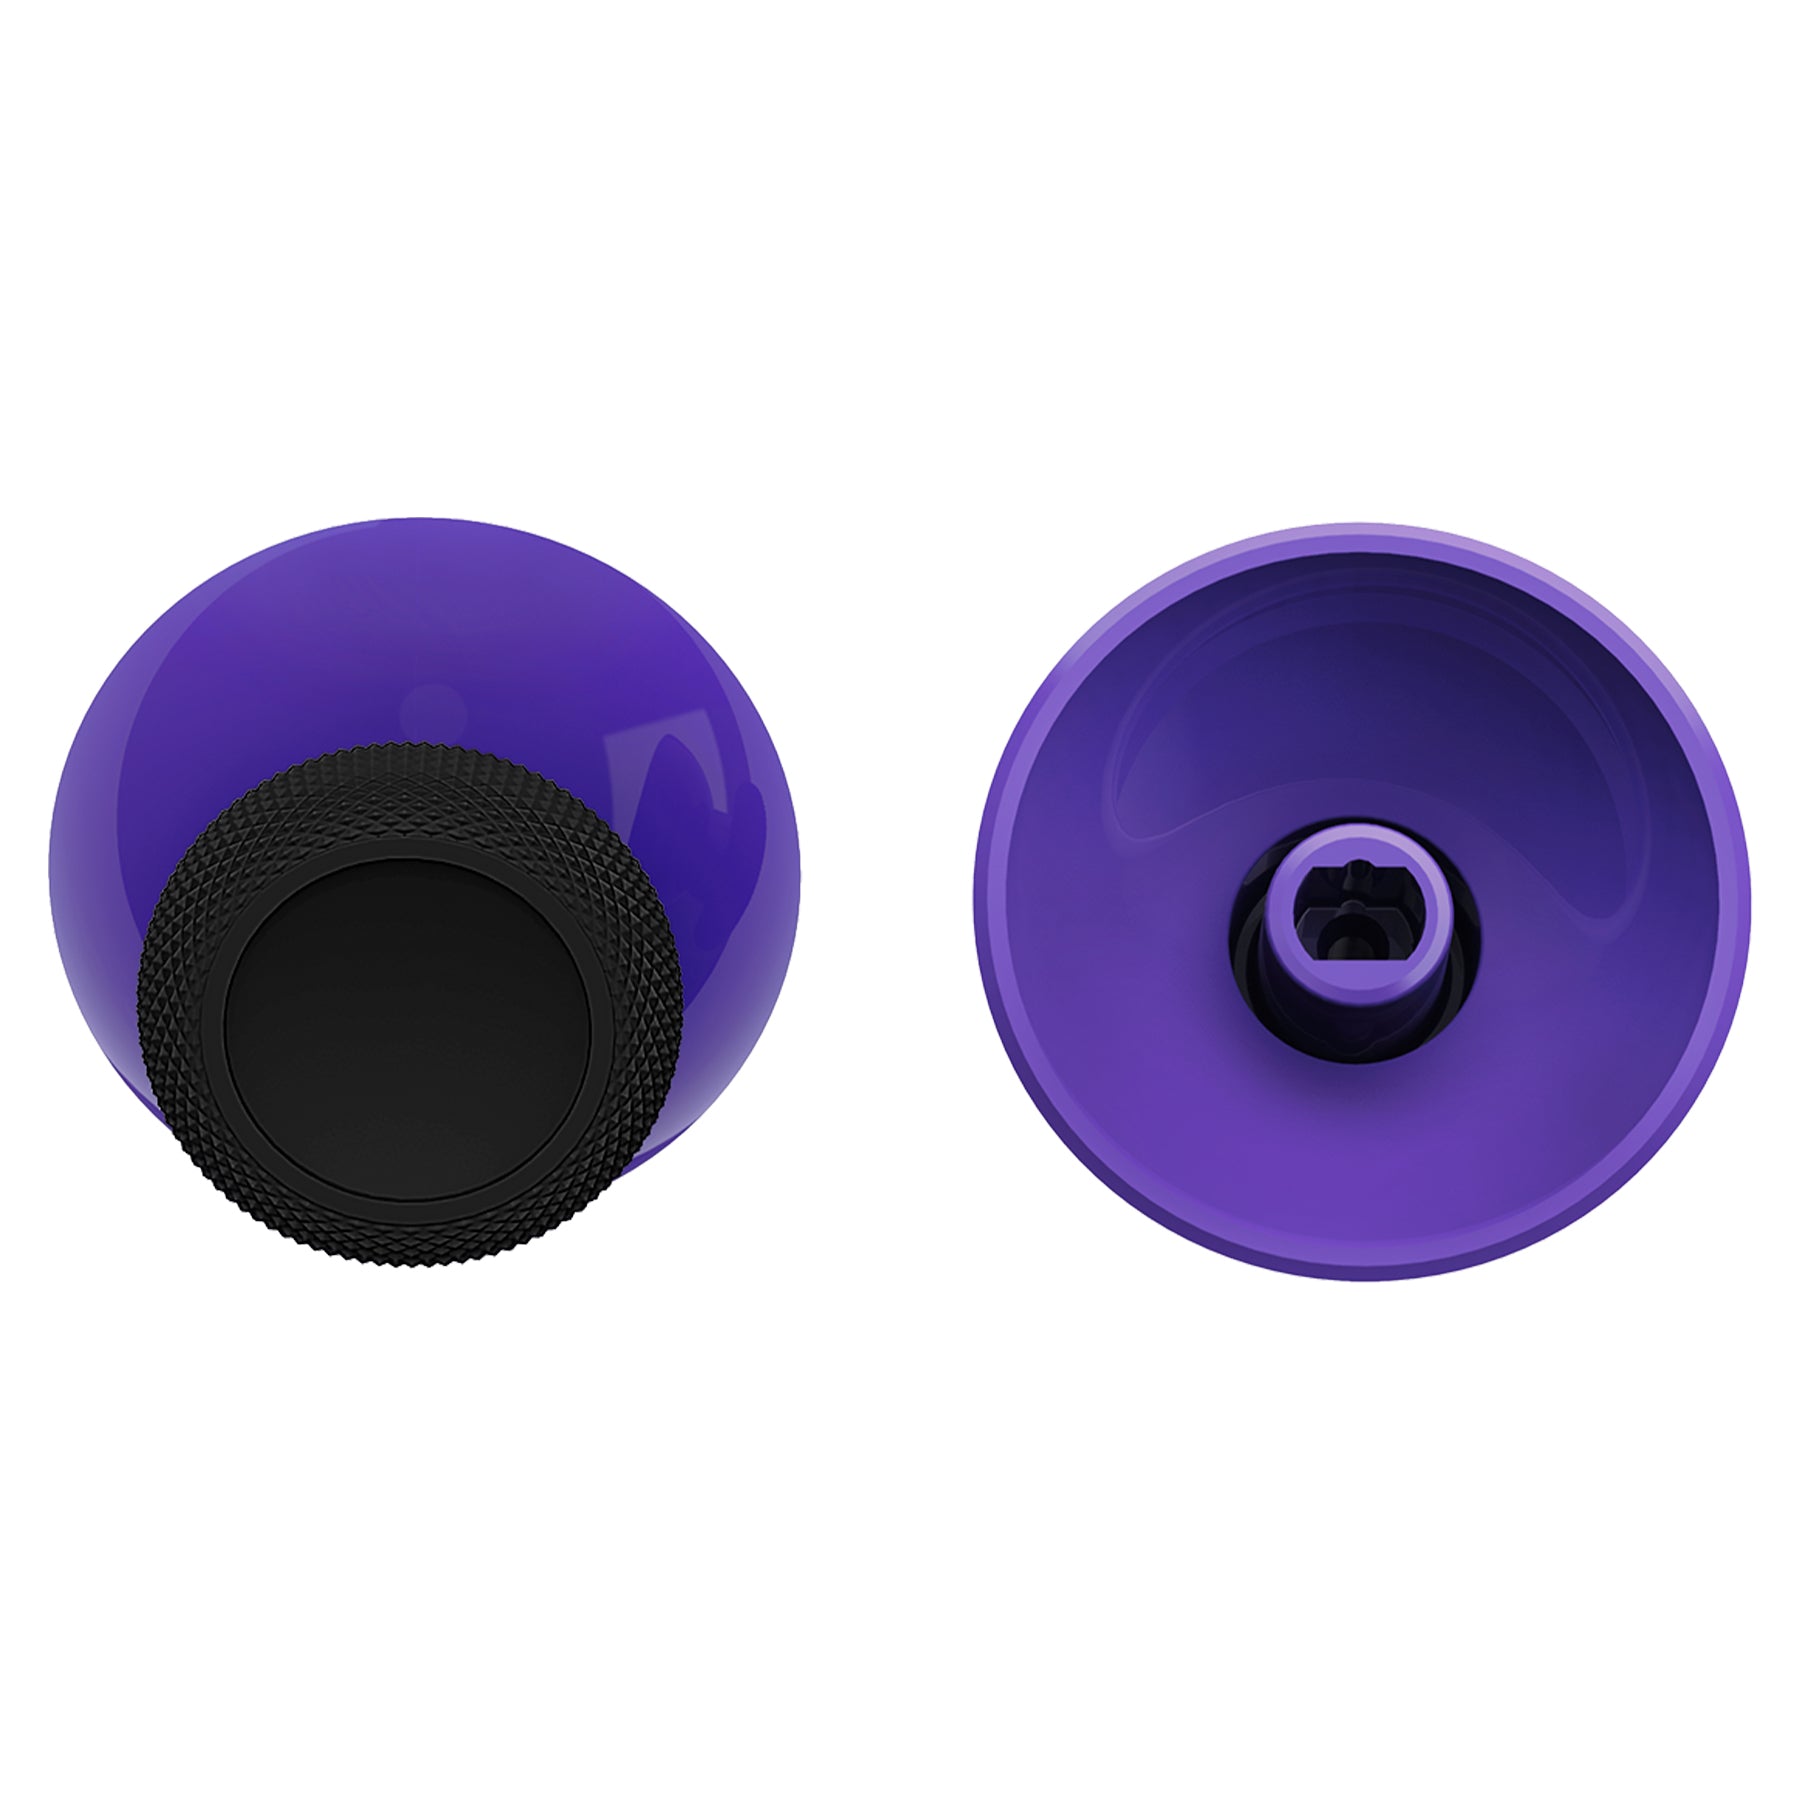 Replacement Thumbsticks for Xbox Series X/S Controller &  Xbox One X/S Controller & Xbox One Standard Controller & Xbox One Elite Controller - Purple & Black eXtremeRate